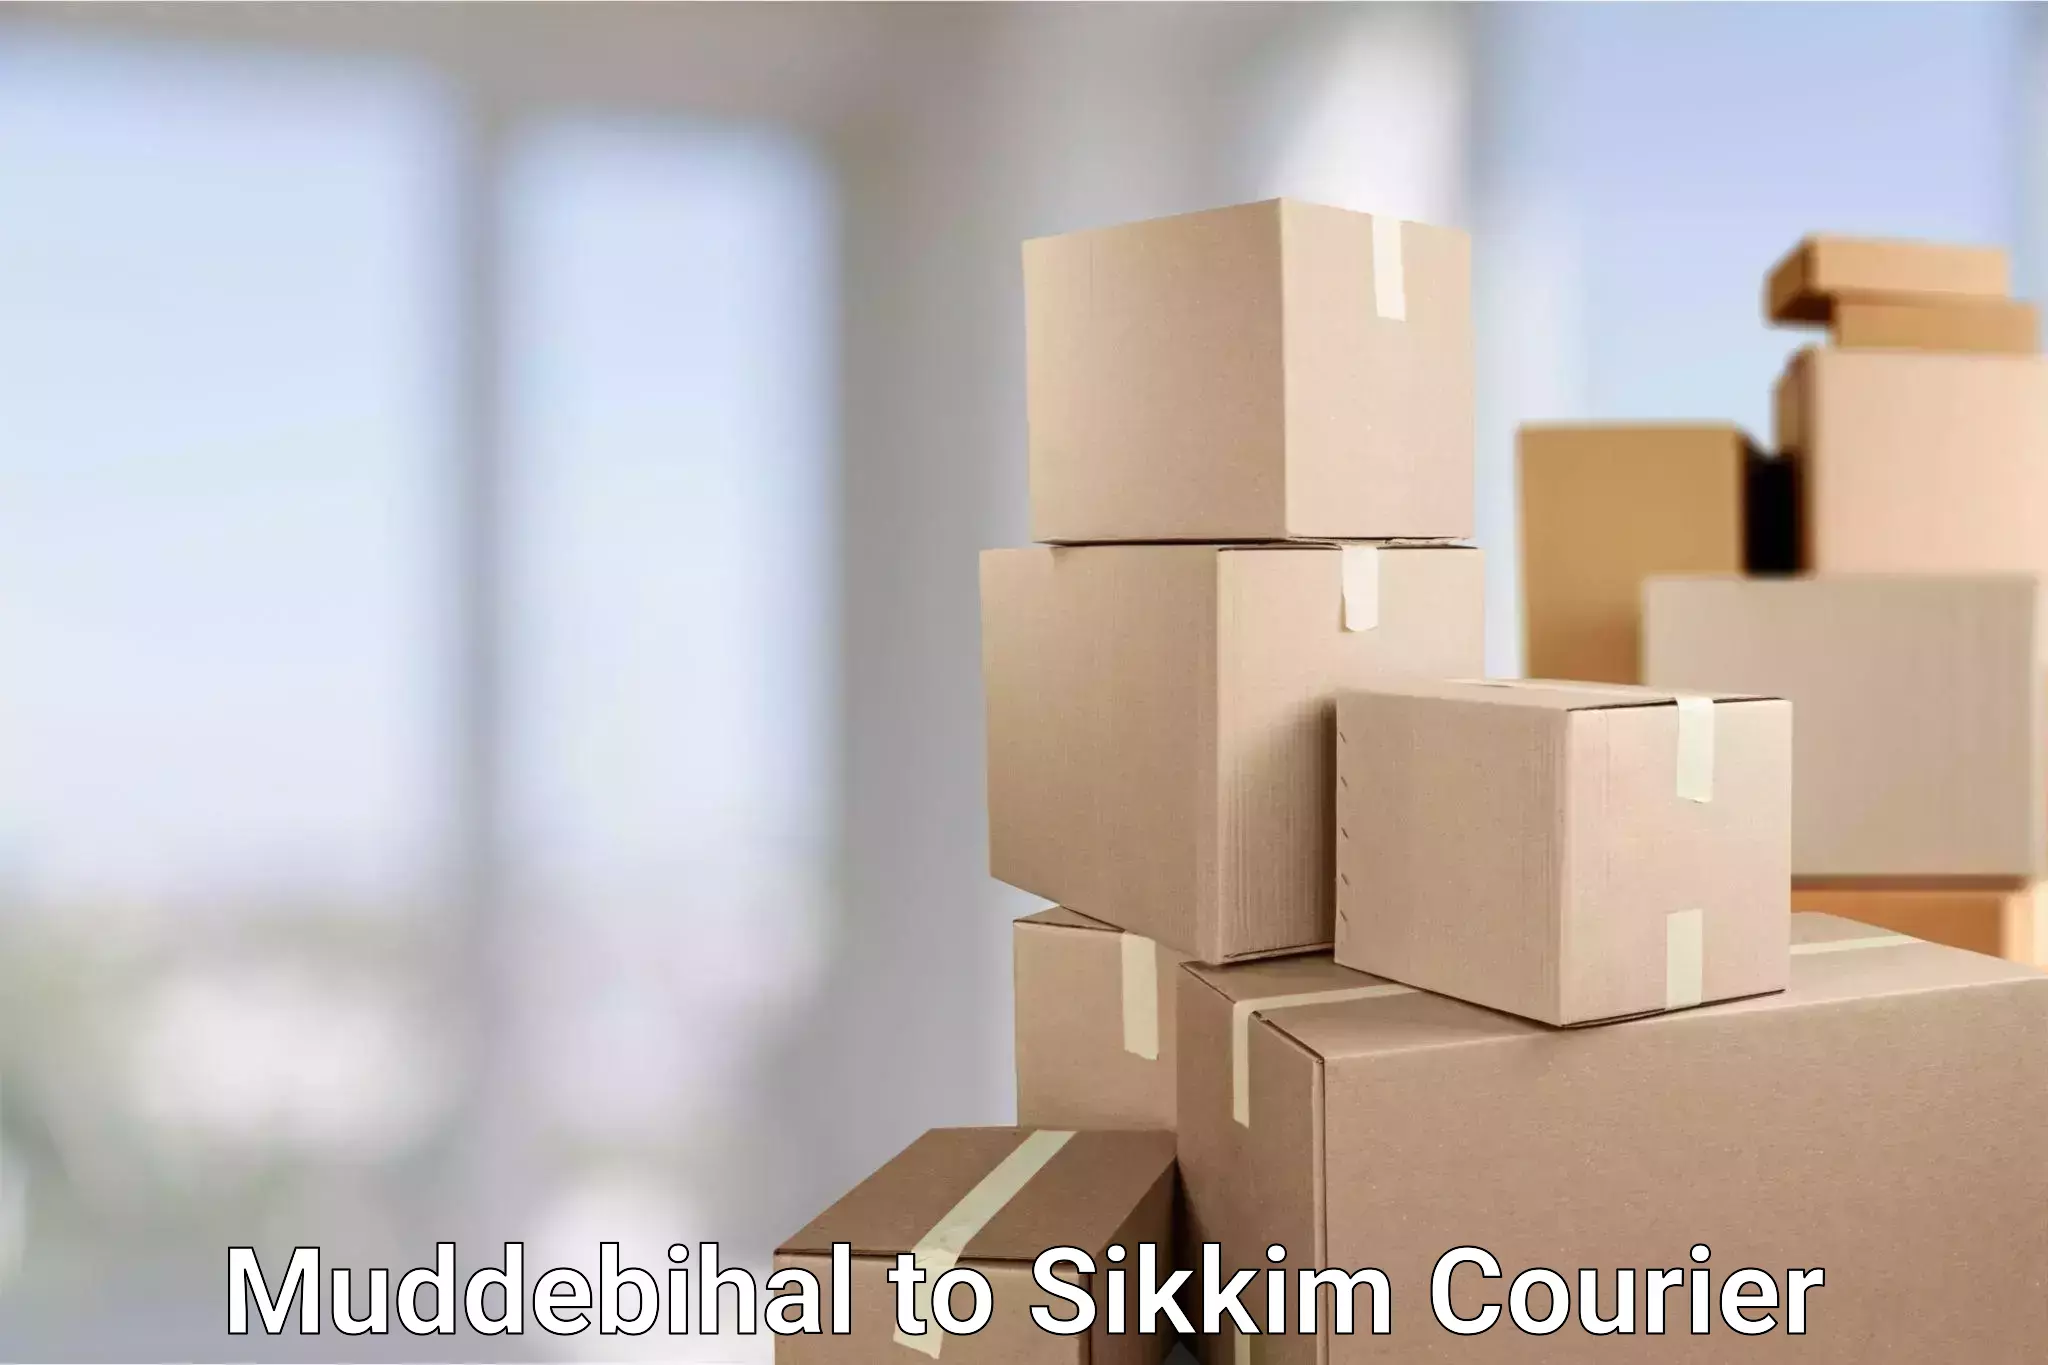 Large package courier Muddebihal to Pelling